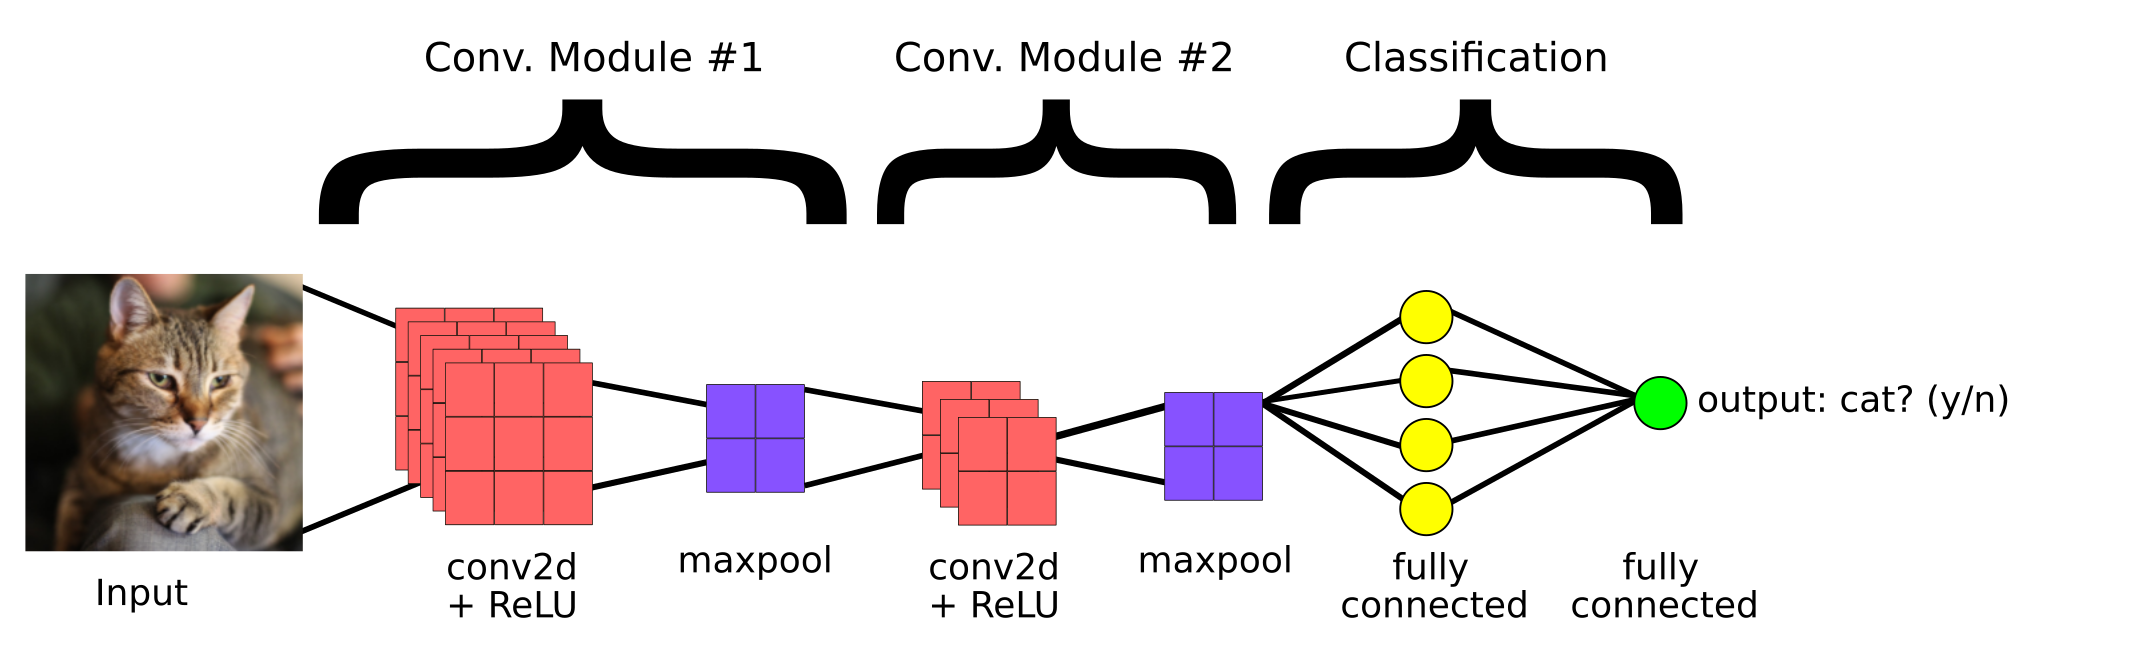 architecture of Convolutional neural network